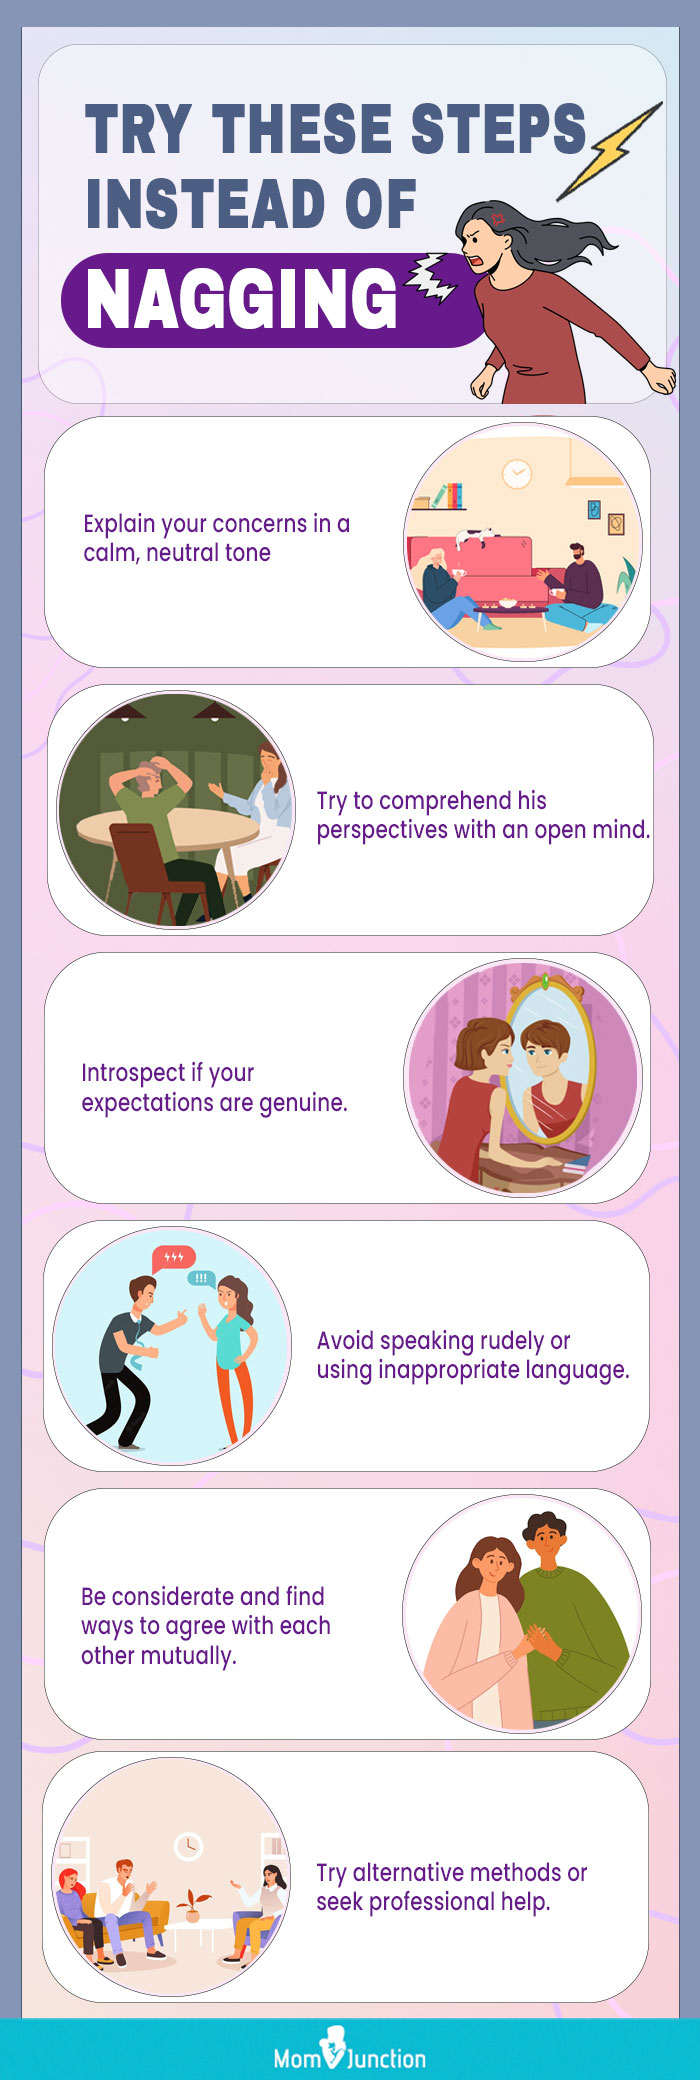 try these steps instead of nagging [infographic]